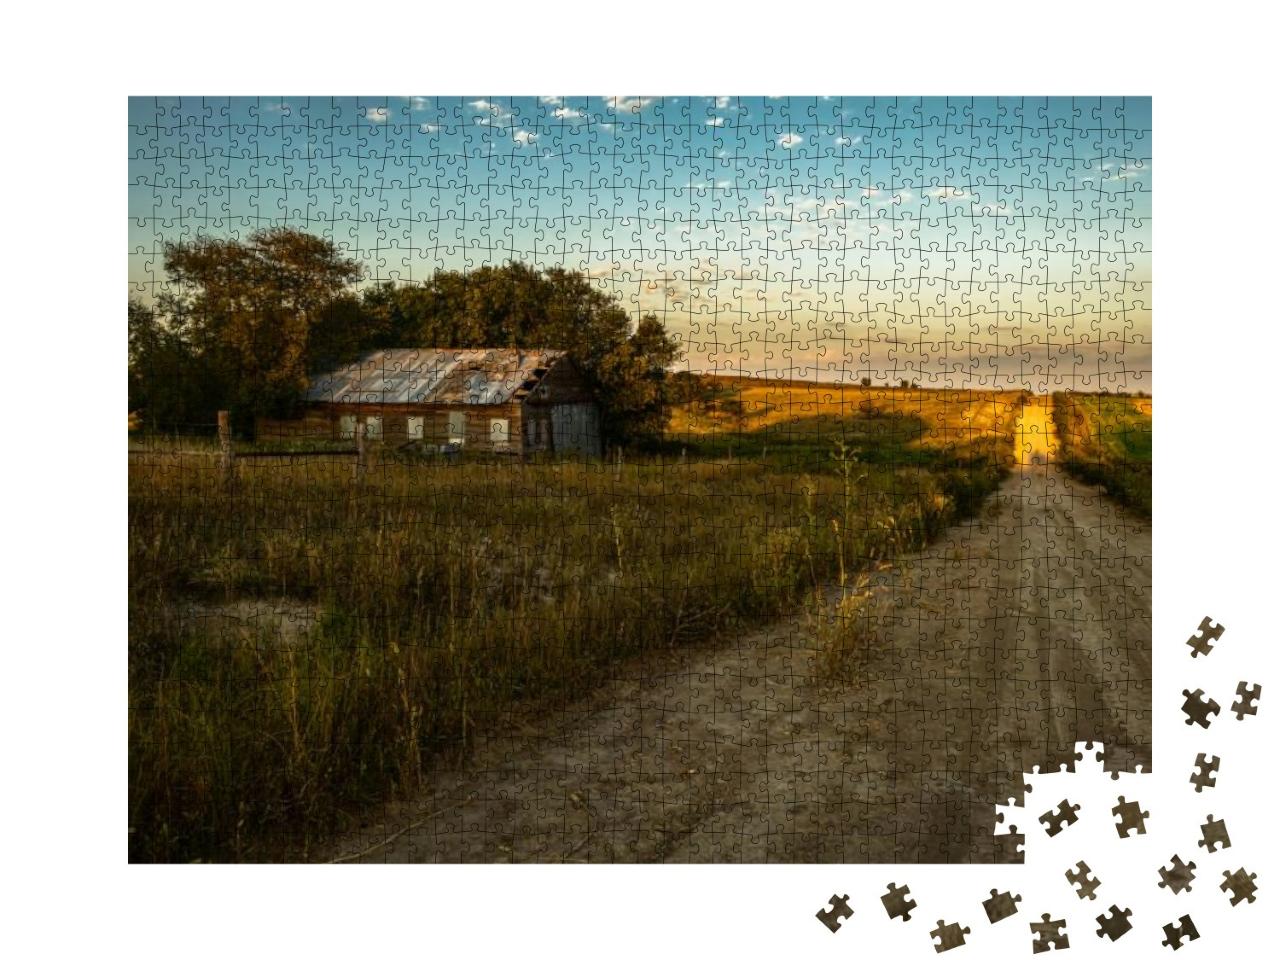 Dirt Road At Sunset in Phillipsburg, Kansas... Jigsaw Puzzle with 1000 pieces